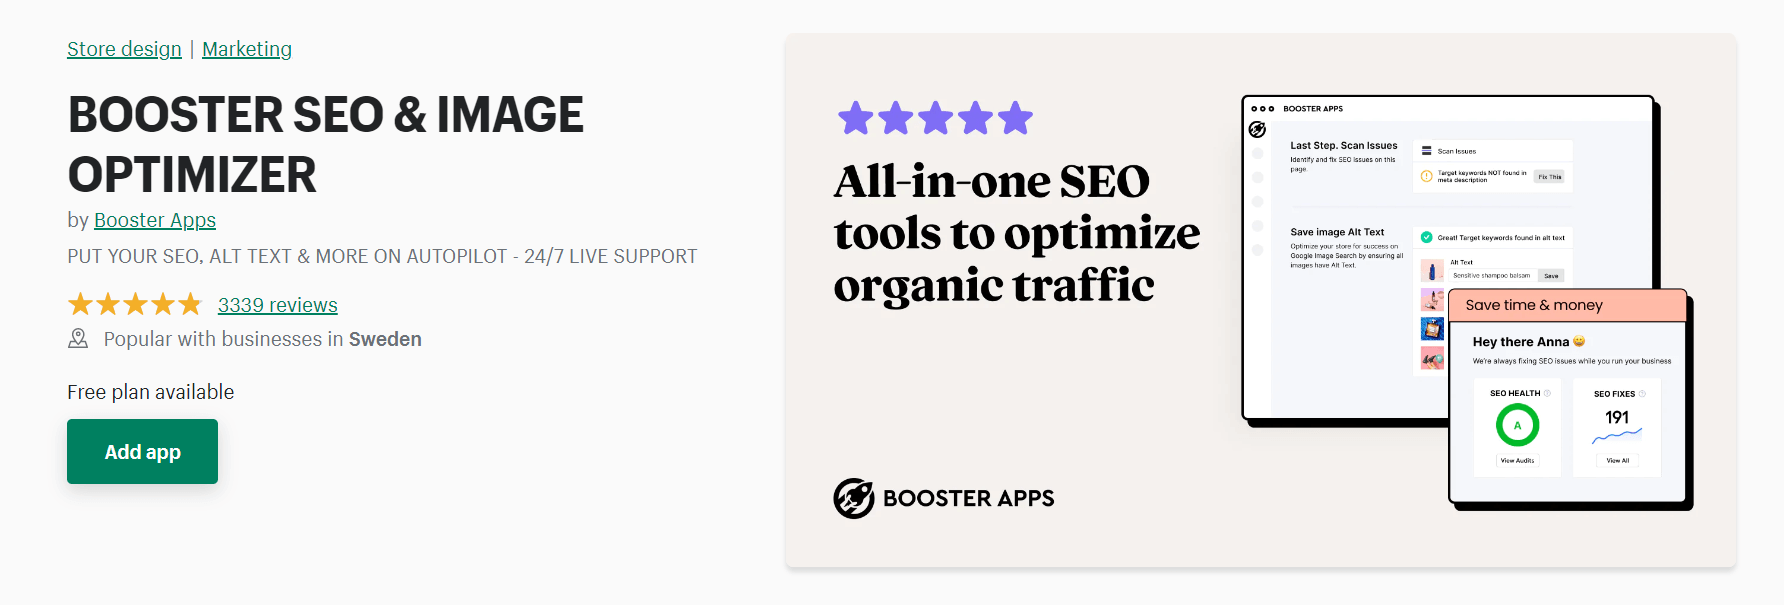 Booster SEO shopify tool for SEO